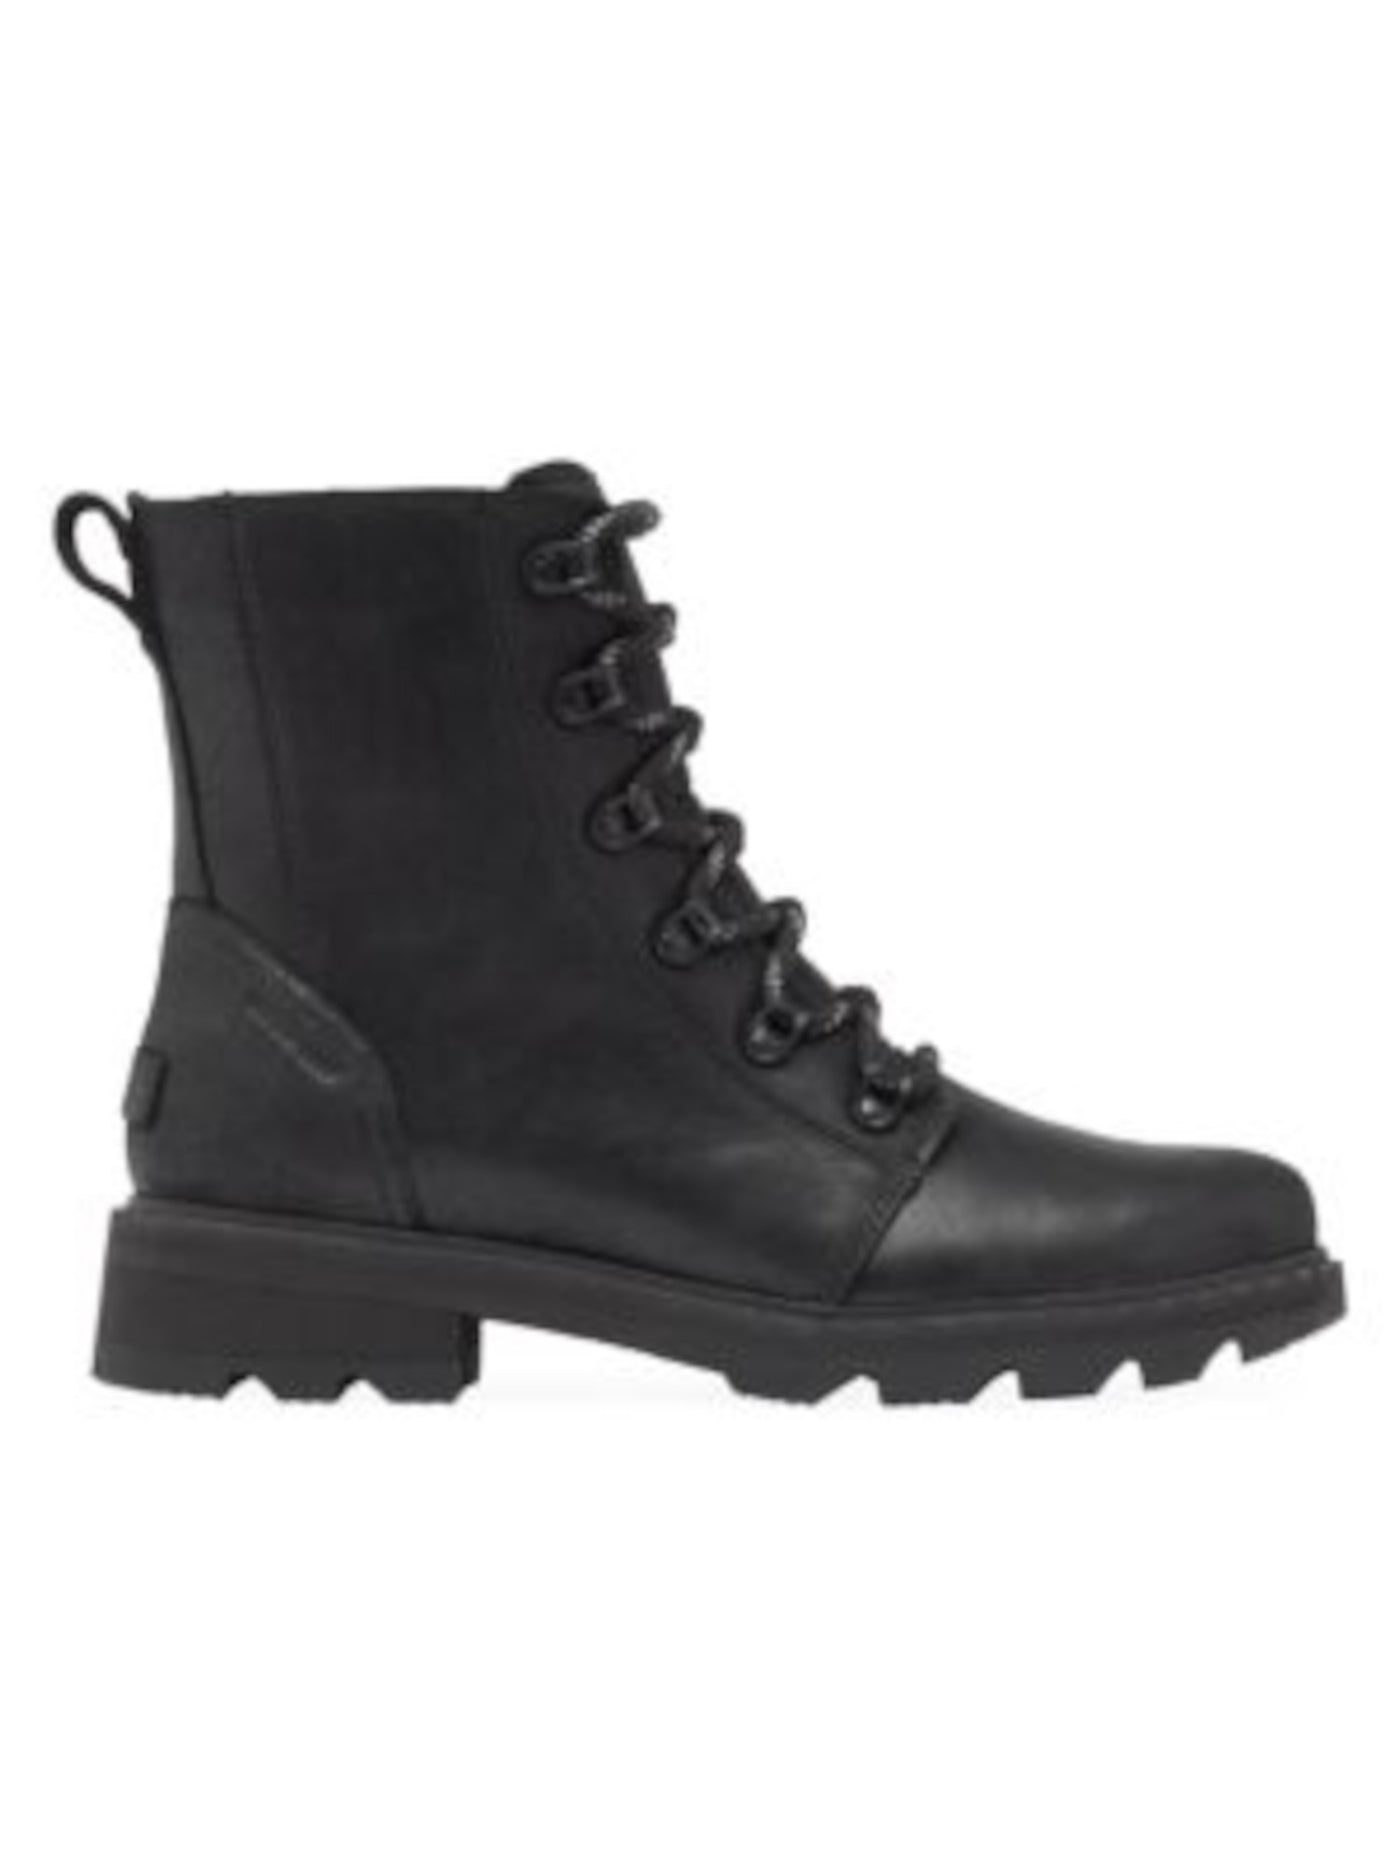 SOREL Womens Black Name At Heel Waterproof Padded Lennox Round Toe Lace-Up Leather Combat Boots 6